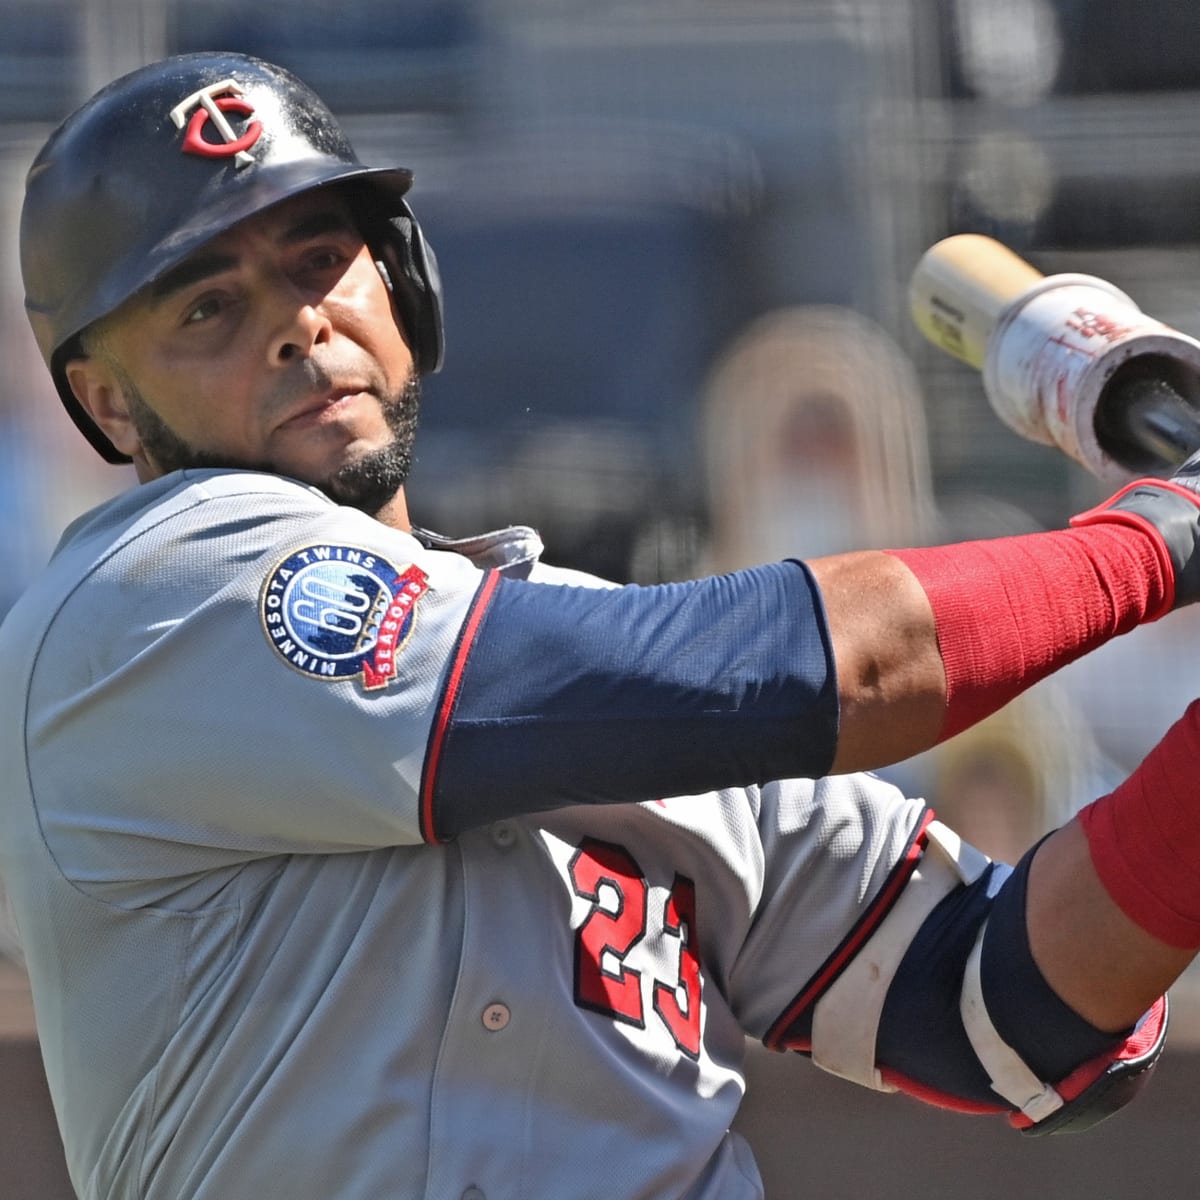 Former Mariners All-Star Nelson Cruz agrees to one-year deal with